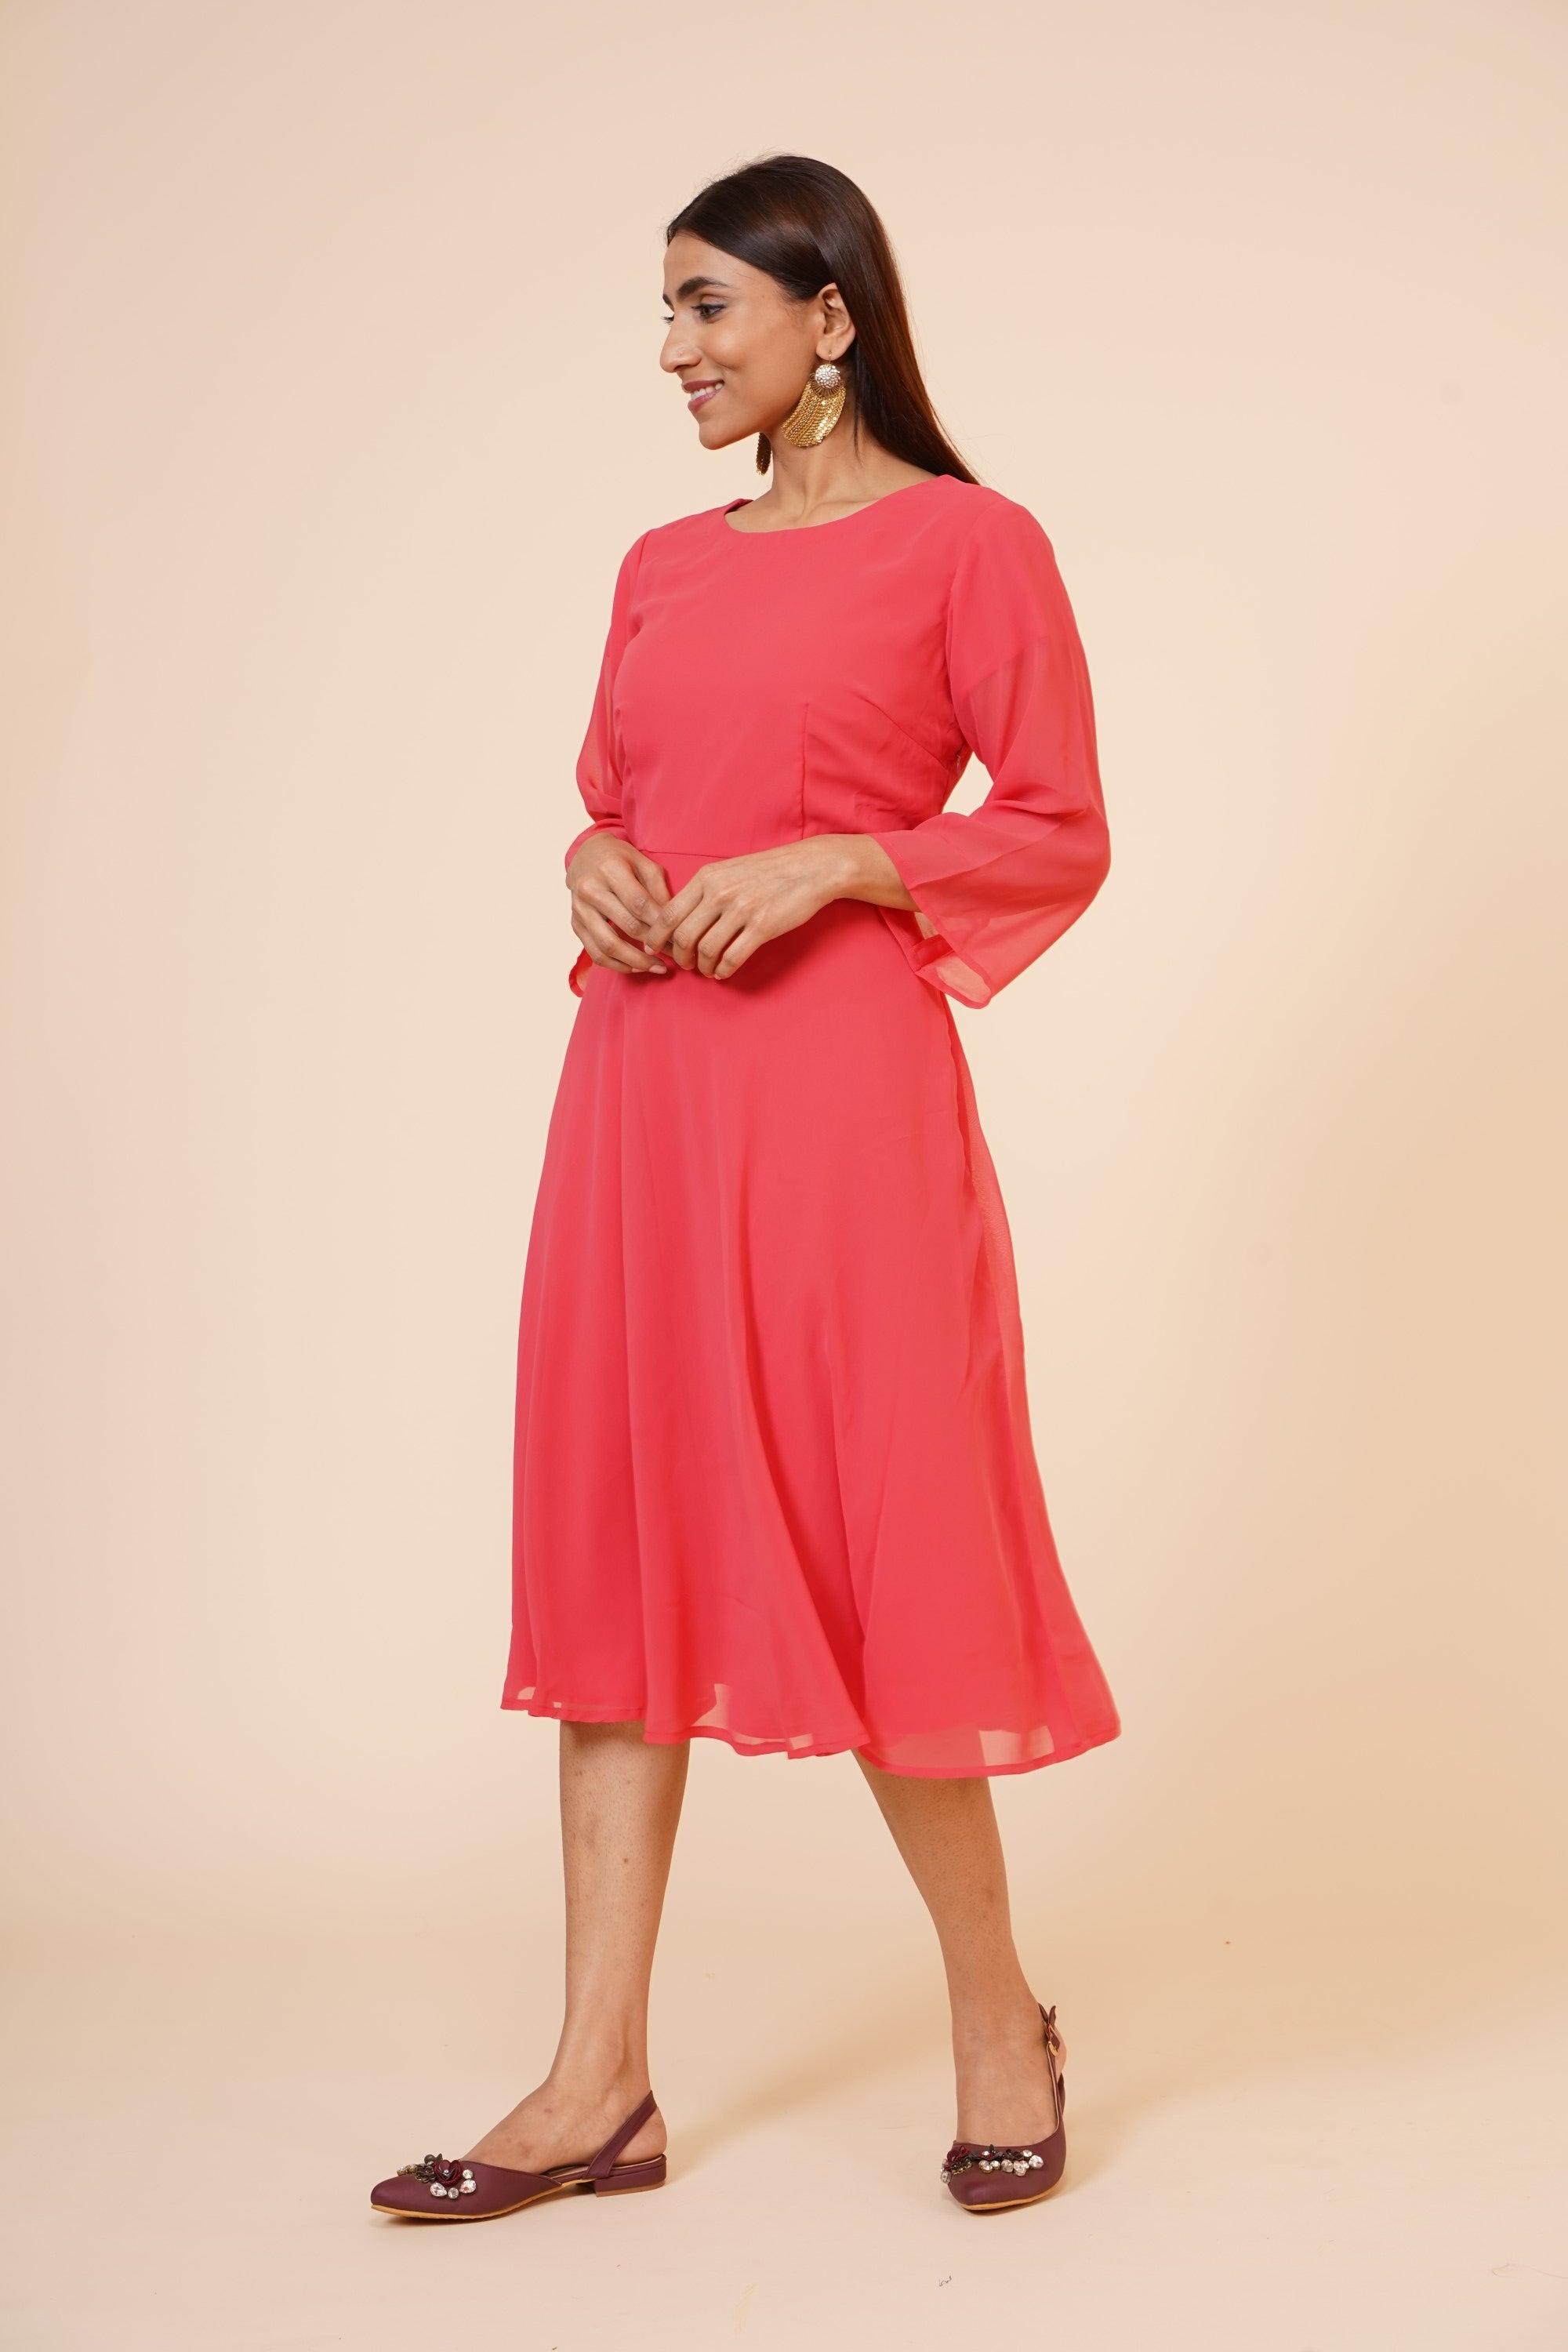 Women's Round Neck Georgette Party/ Casual Dress In Peach - MIRACOLOS by Ruchi